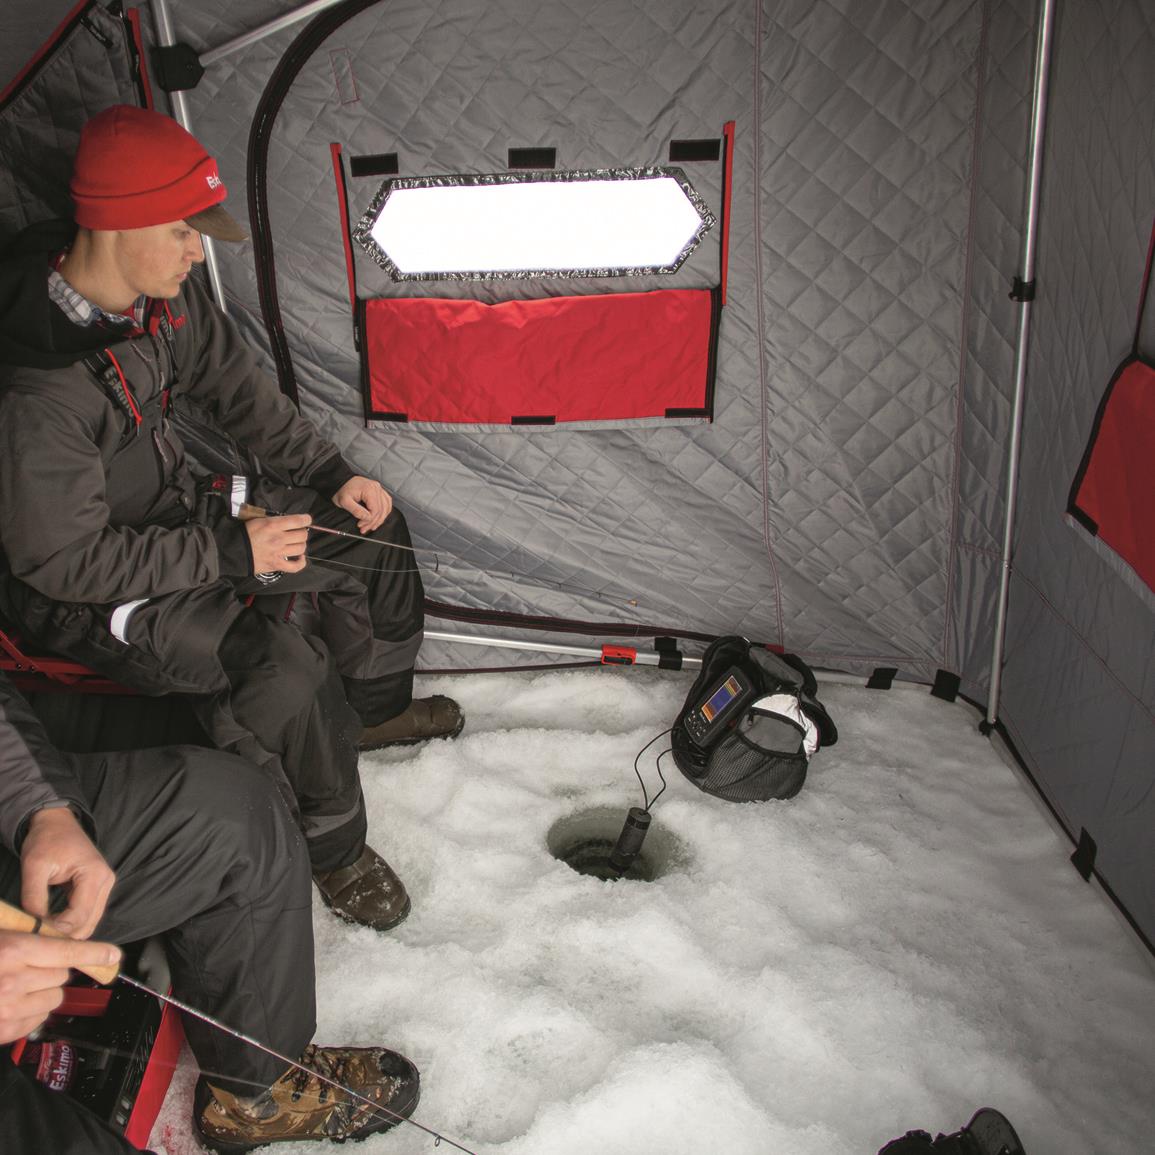 Designing the BEST Two-Person Insulated Ice Fishing Sled House